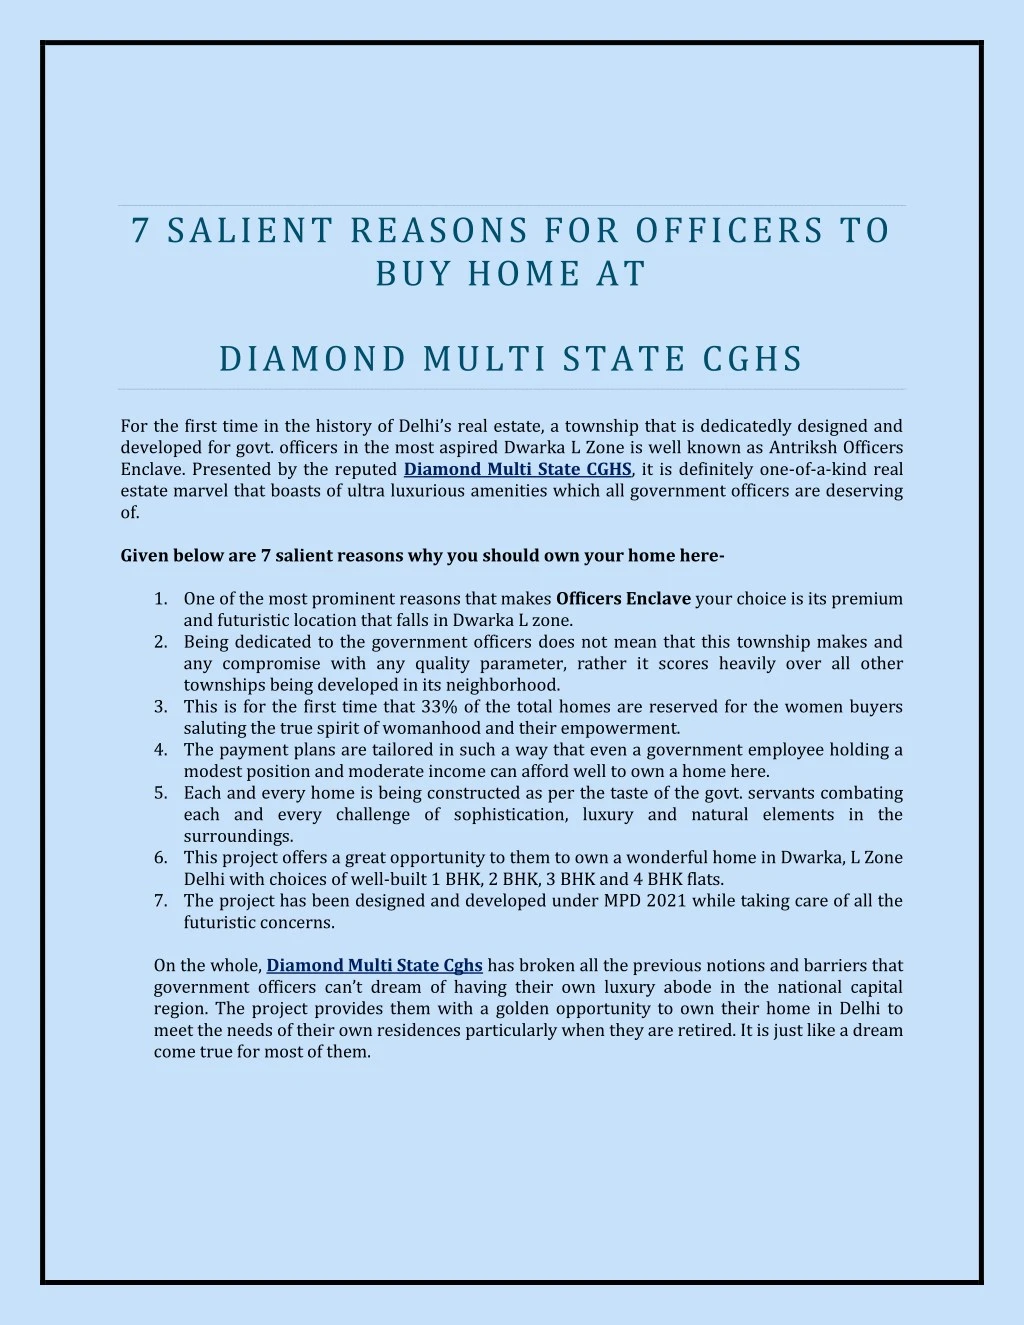 7 salient reasons for officers to buy home at